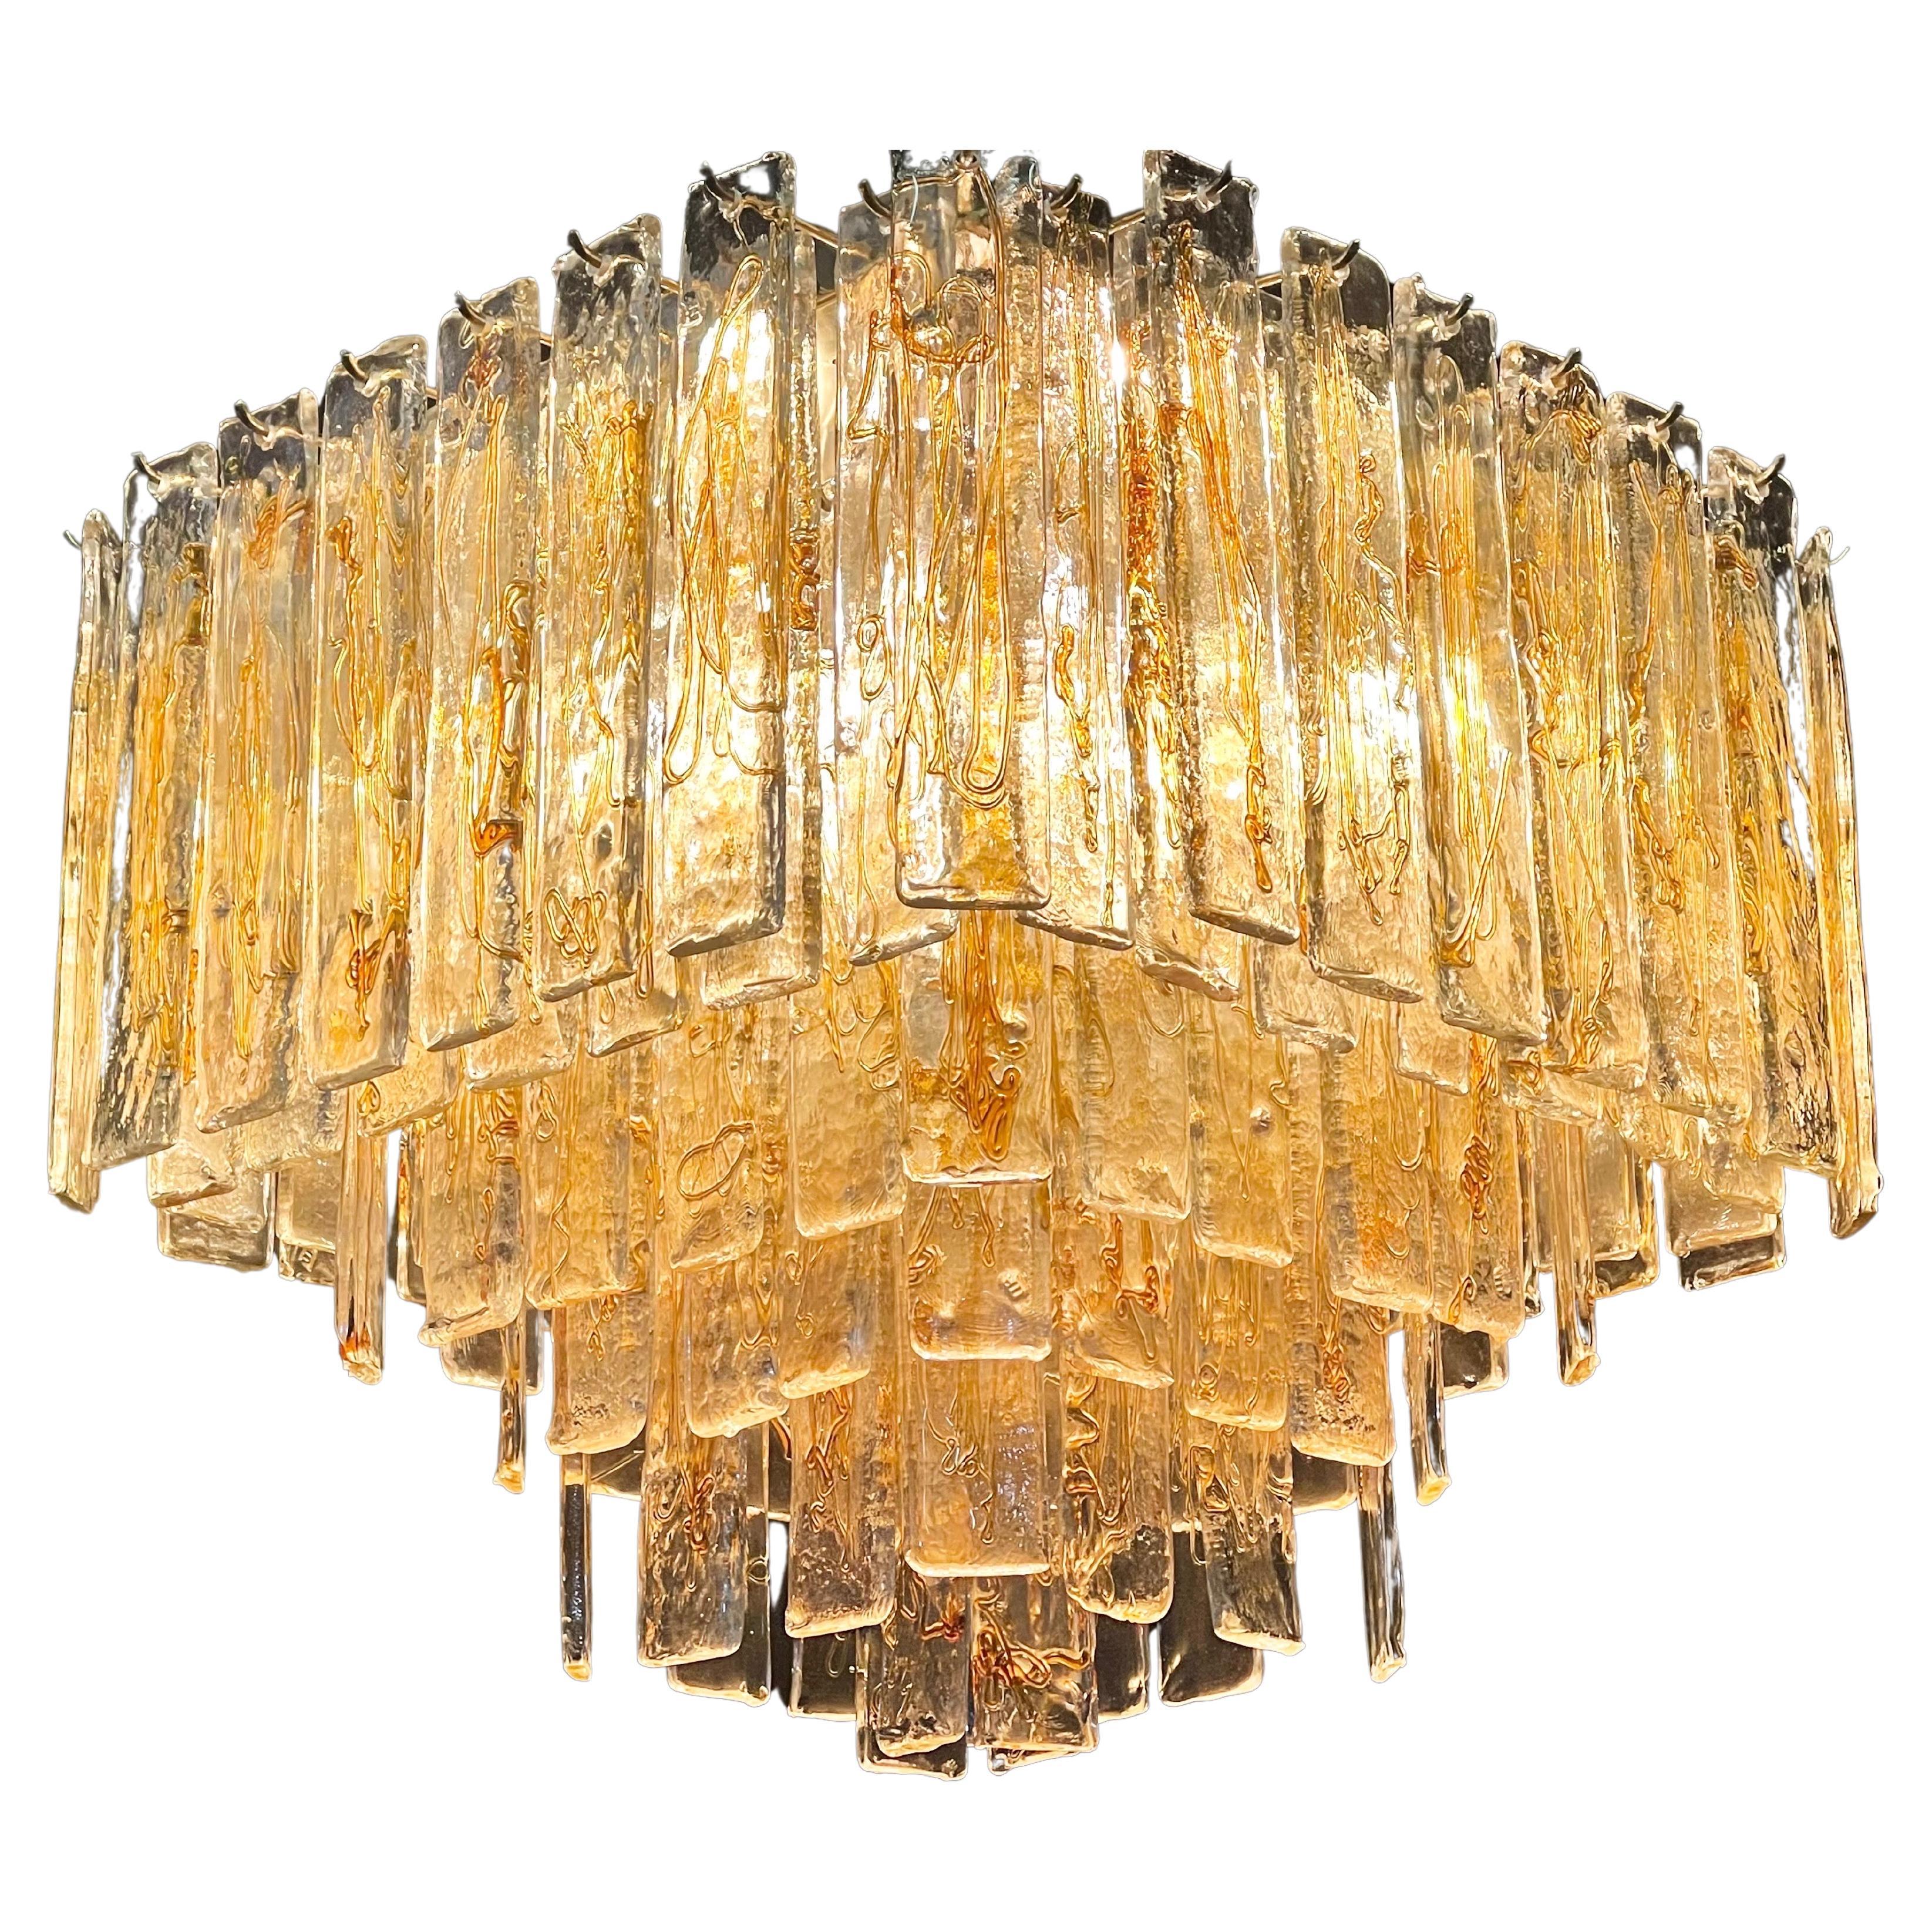 Rare mid-century amber noodle Murano glass flush mount by Venini or Mazzega, Italy, circa 1960s.
The chandelier is made of over 100 Mazzega Murano glass elements and gilt metal frame.
Lamp socket: 8 x E14 for standard screw bulbs.



